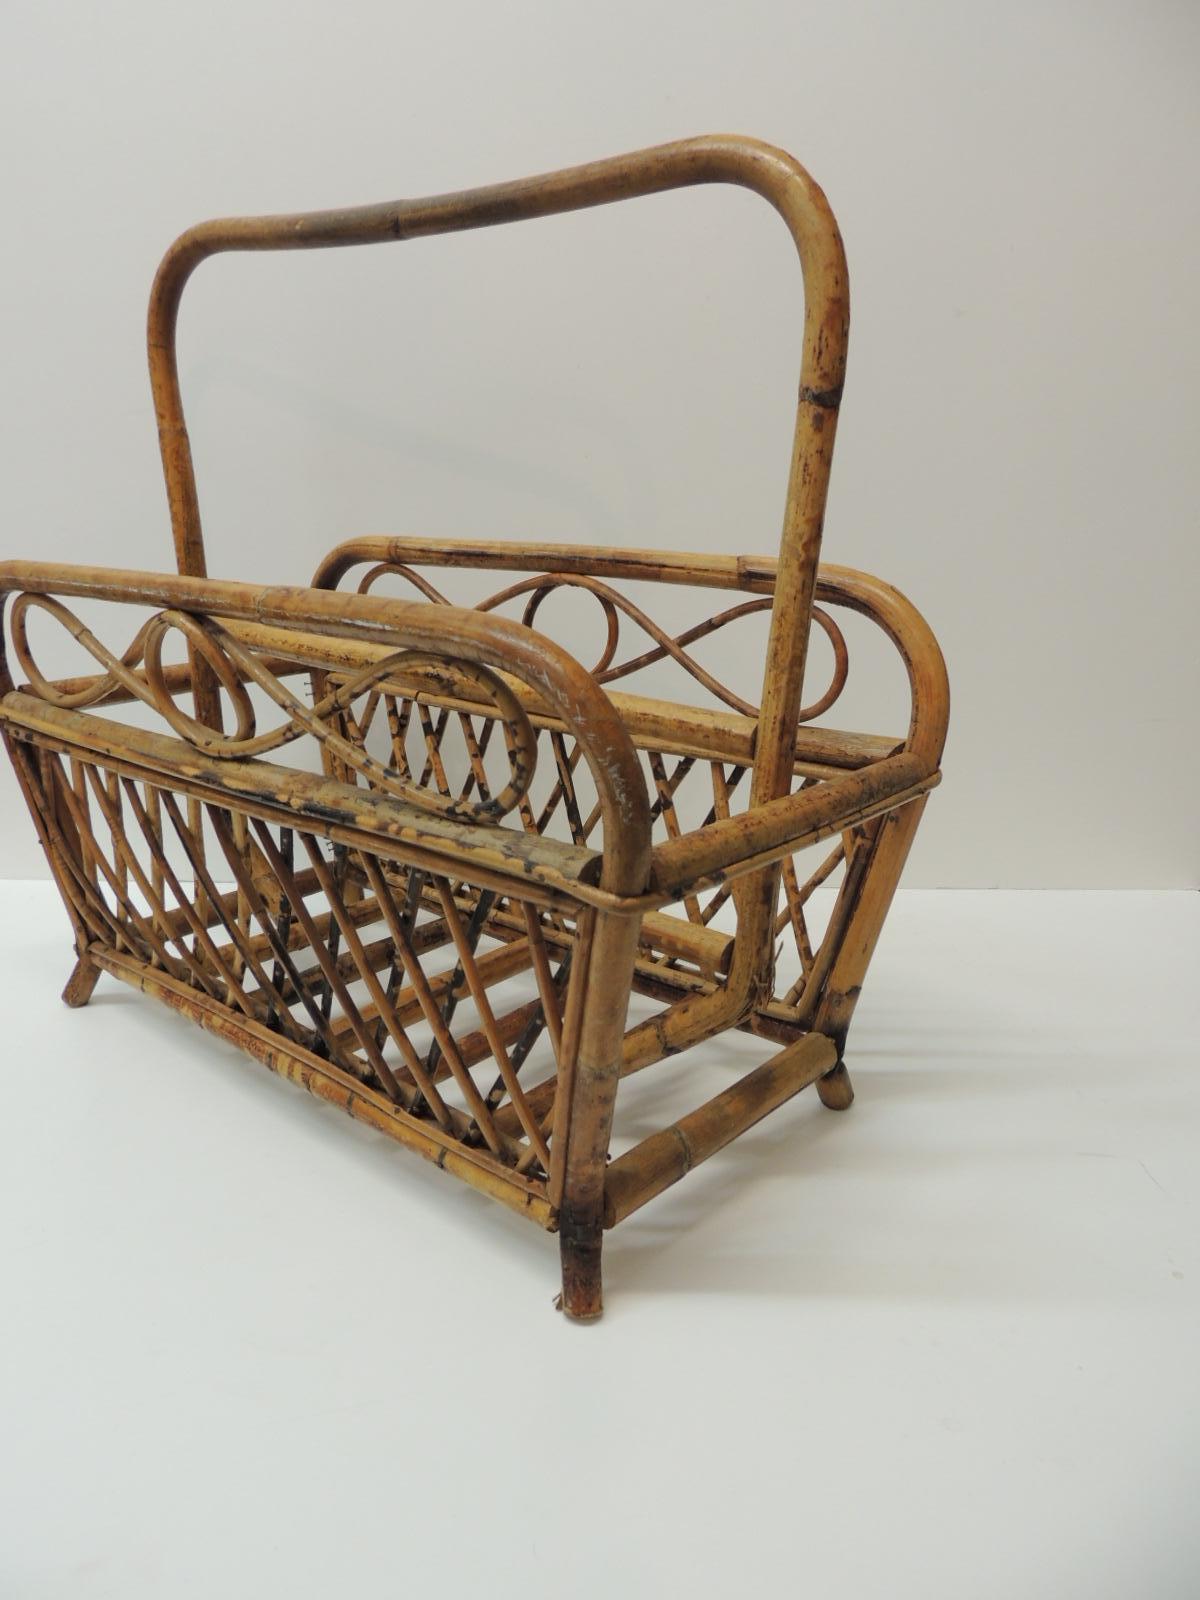 Bohemian Vintage Faux Tortoise Magazine Rack in Bamboo and Rattan